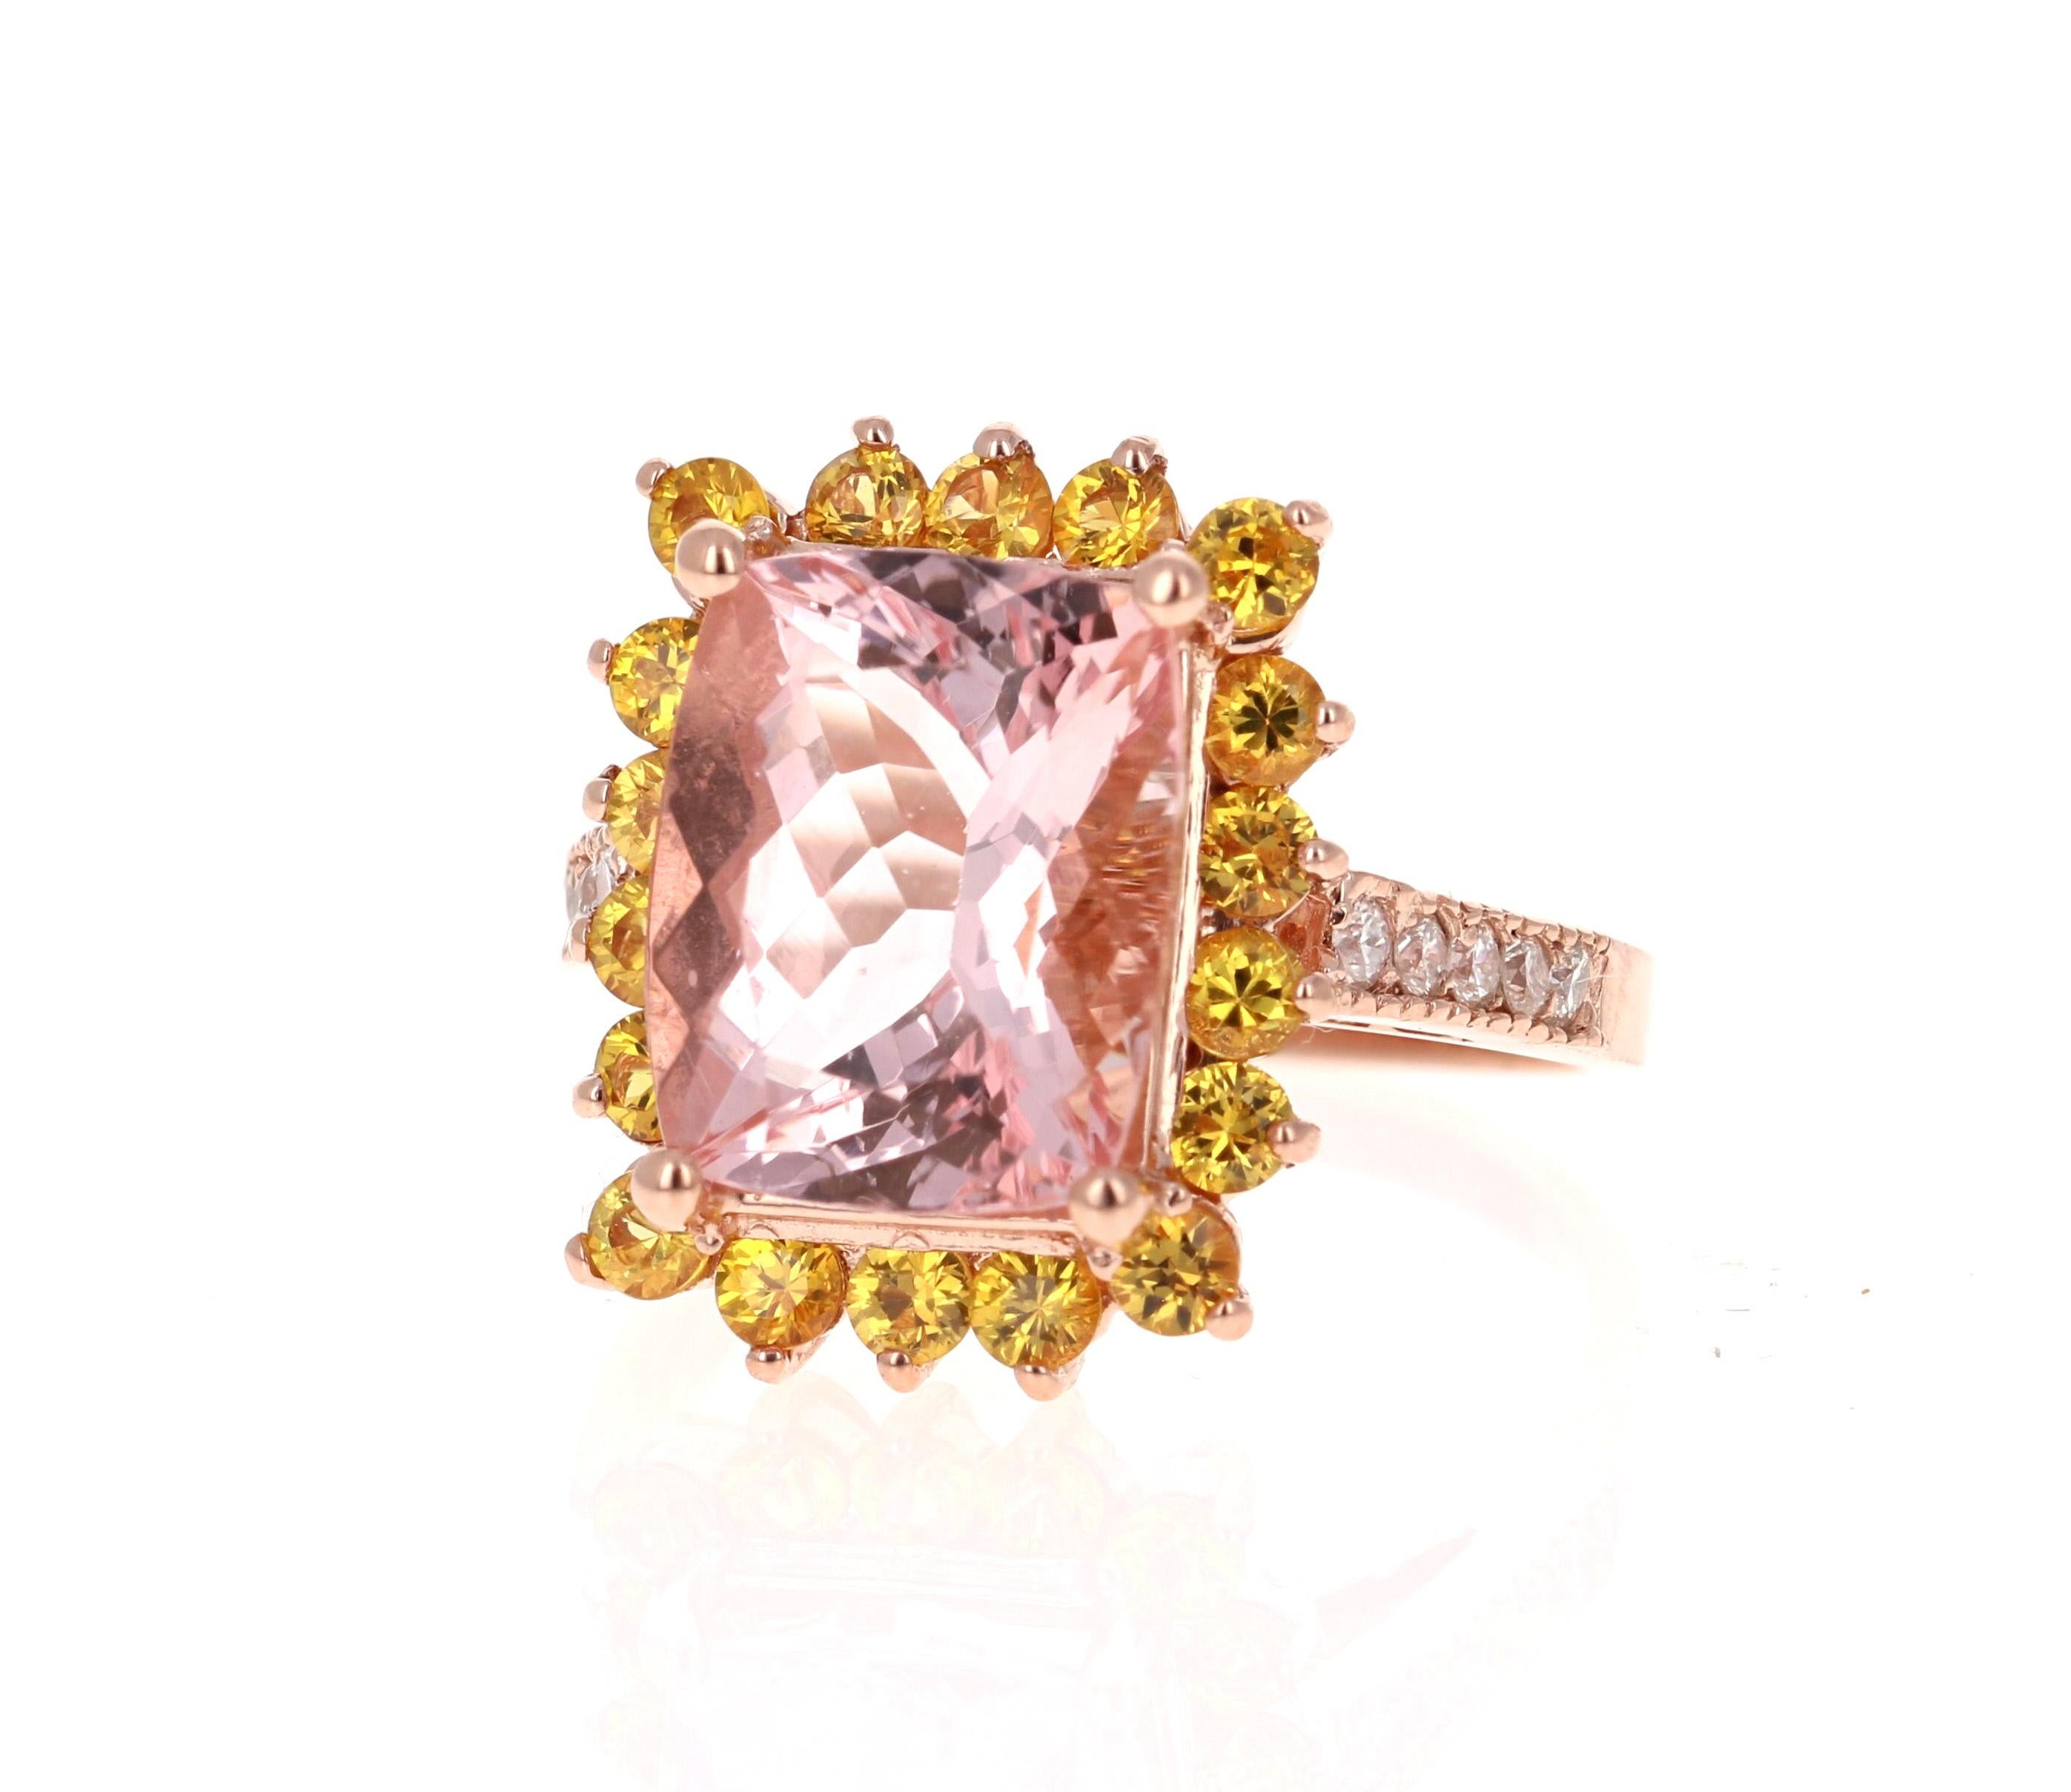 This gorgeous and unique Morganite Diamond Ring has a 5.18 Carat Rectangular Cut Morganite which is surrounded by a Halo of 18 Yellow Sapphires that weigh 1.26 Carats and is accented with 10 Round Cut Diamonds on the shank that weigh 0.22 Carats